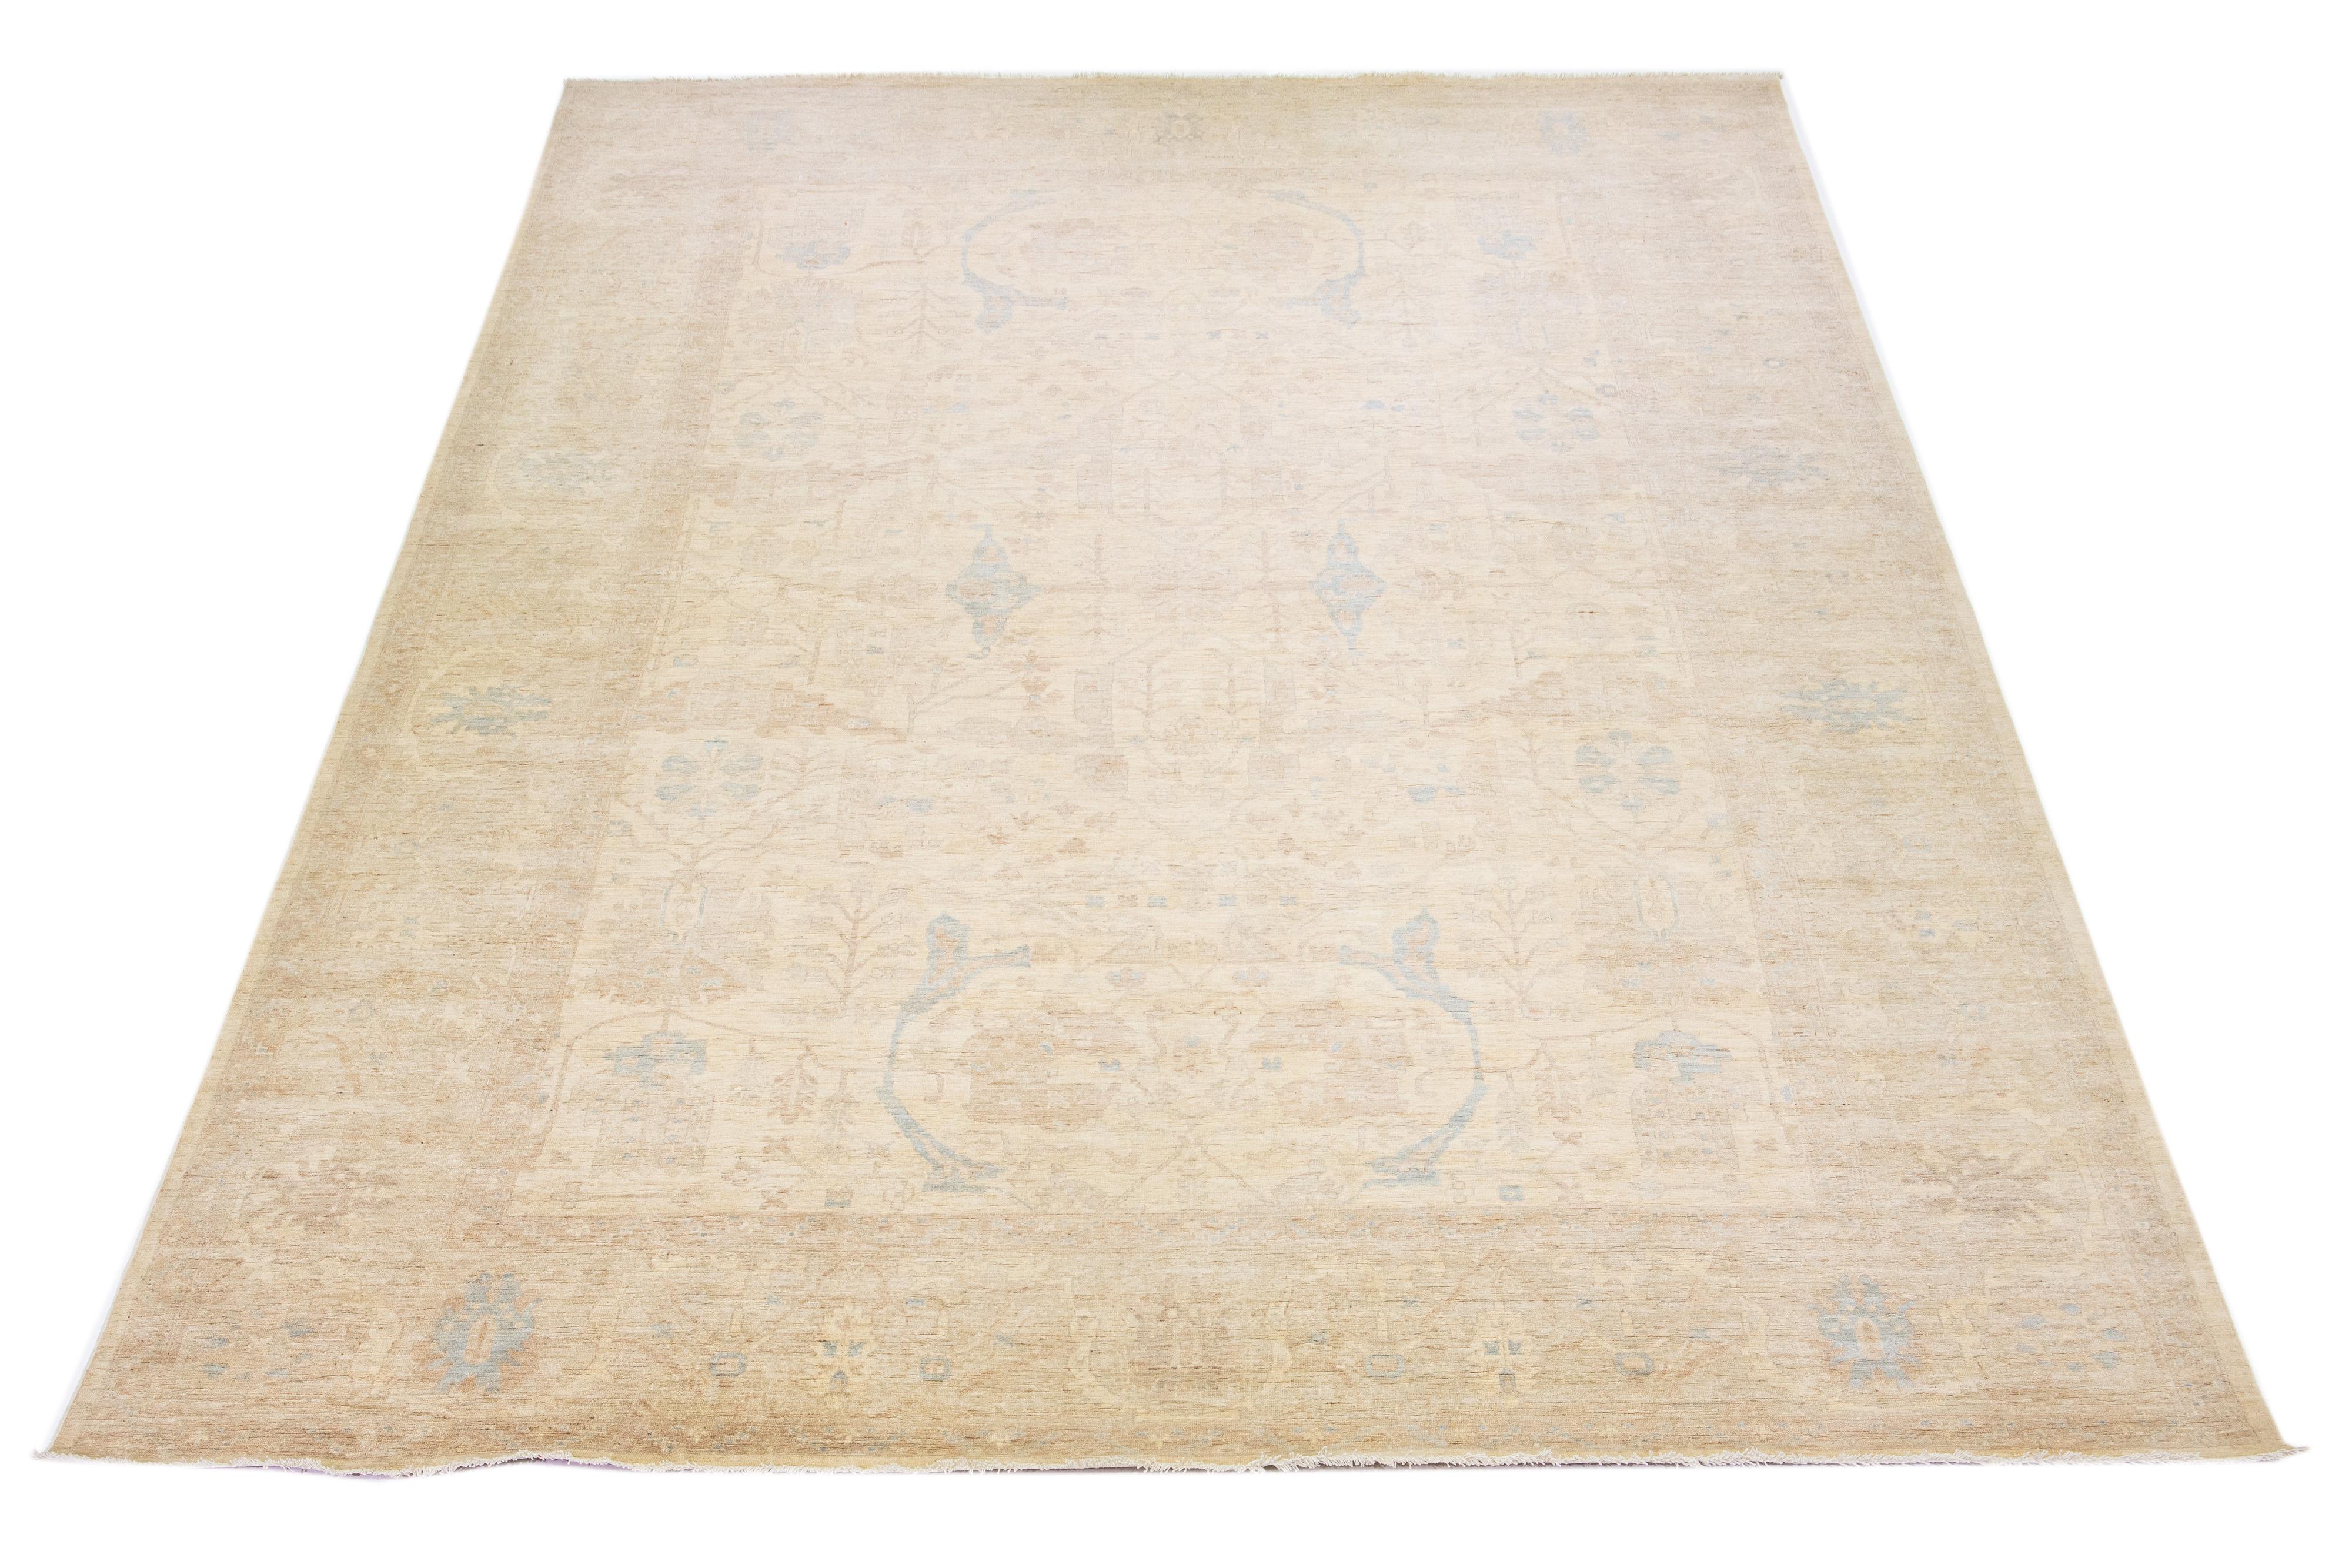 Beautiful modern Oushak hand-knotted wool rug with a beige color field. This Piece has brown and blue accent colors in a gorgeous all-over floral motif.

This rug measures: 12'5